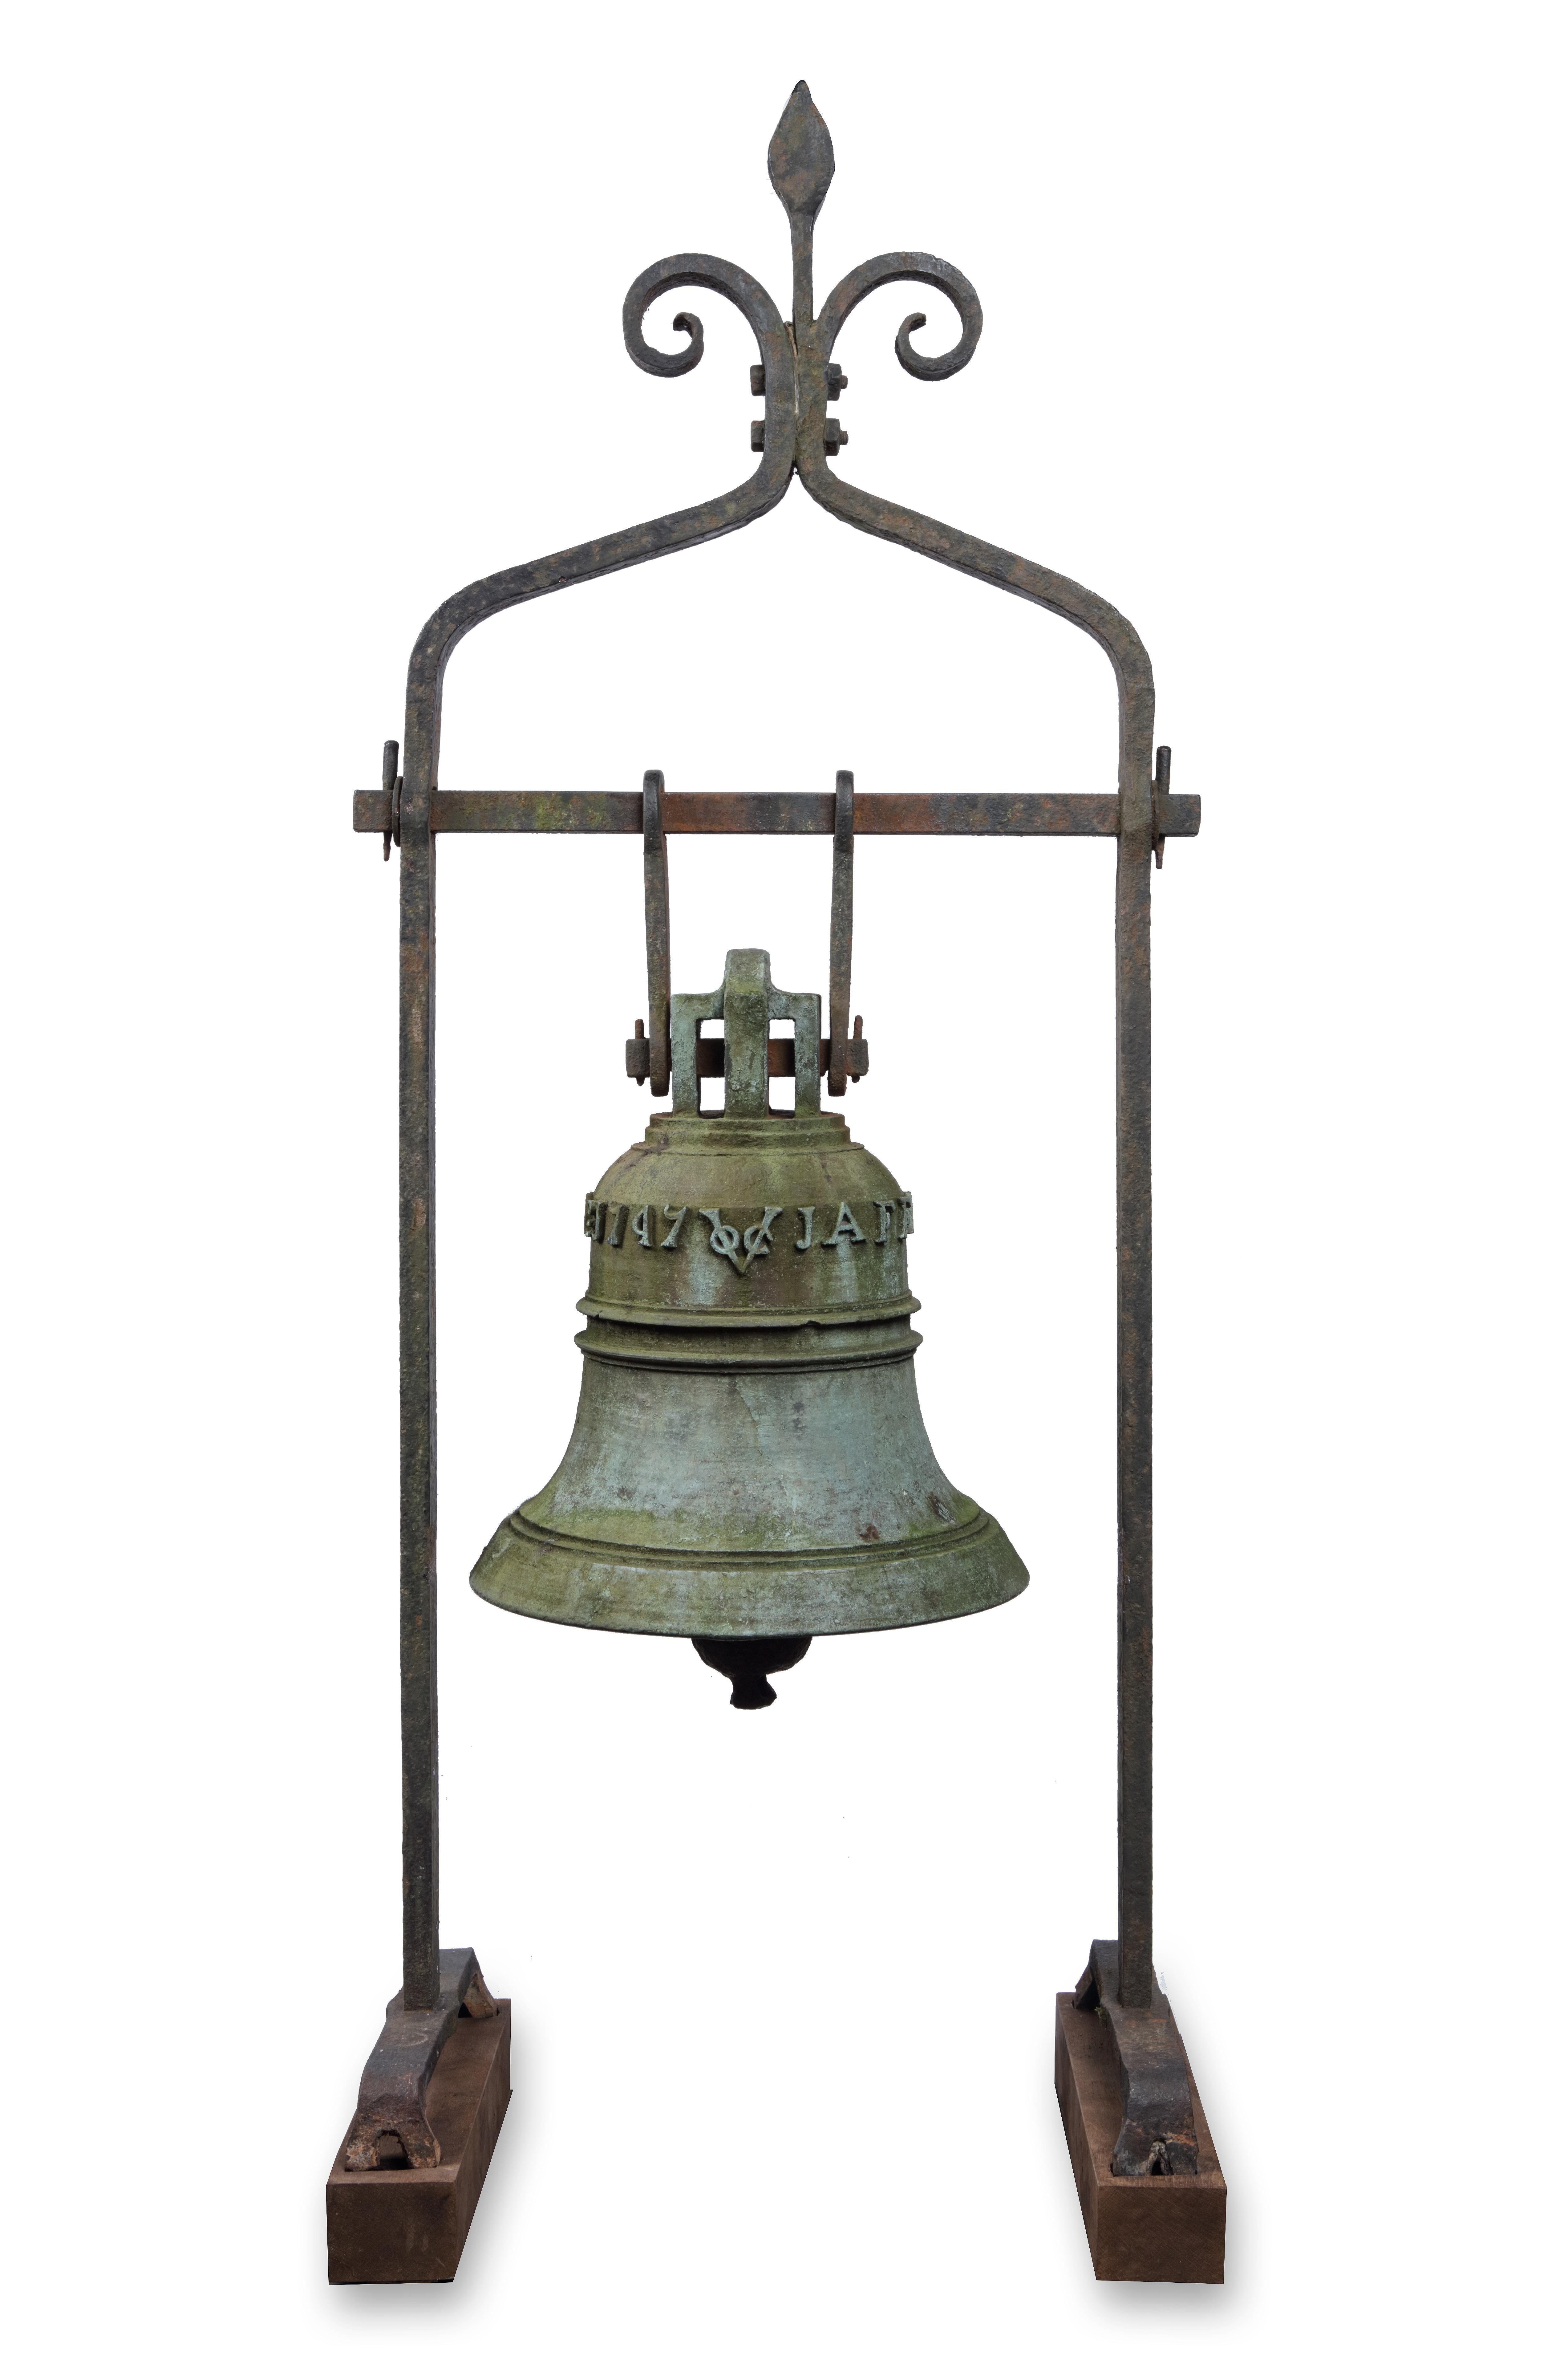 The bell of the VOC fortress in Jaffna, Sri Lanka, marked JAFFANAPATNAM Ao 1747 VOC

Cast in Jaffnapatnam or Colombo from Japanese copper, 1747

Measures: Height 44 x diameter 36.5 cm

In 1658 Rijcklof van Goens (1619-1682) conquered